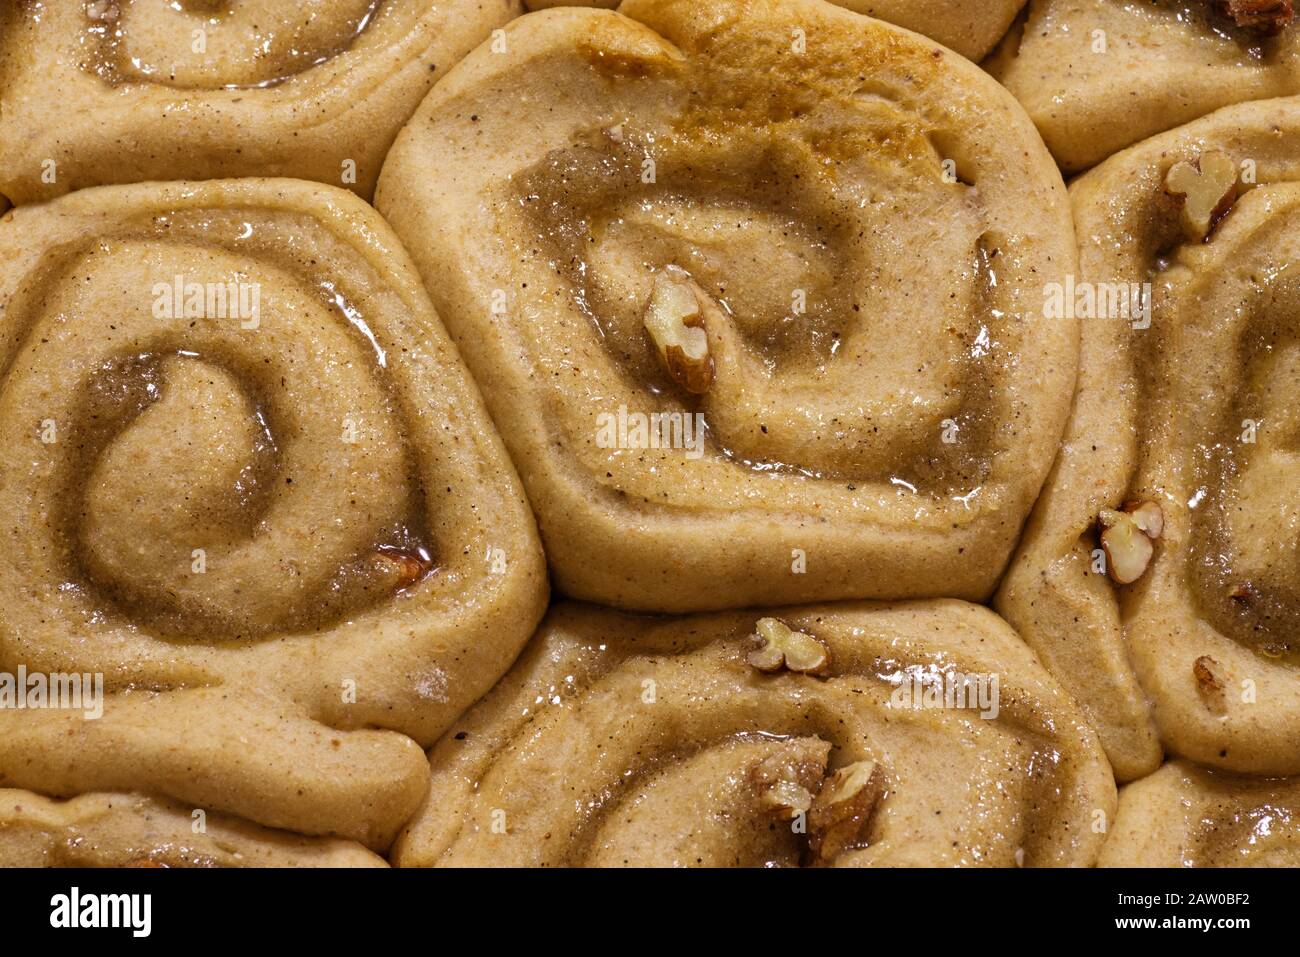 detail of raw unbaked sticky bun rolls after rising Stock Photo